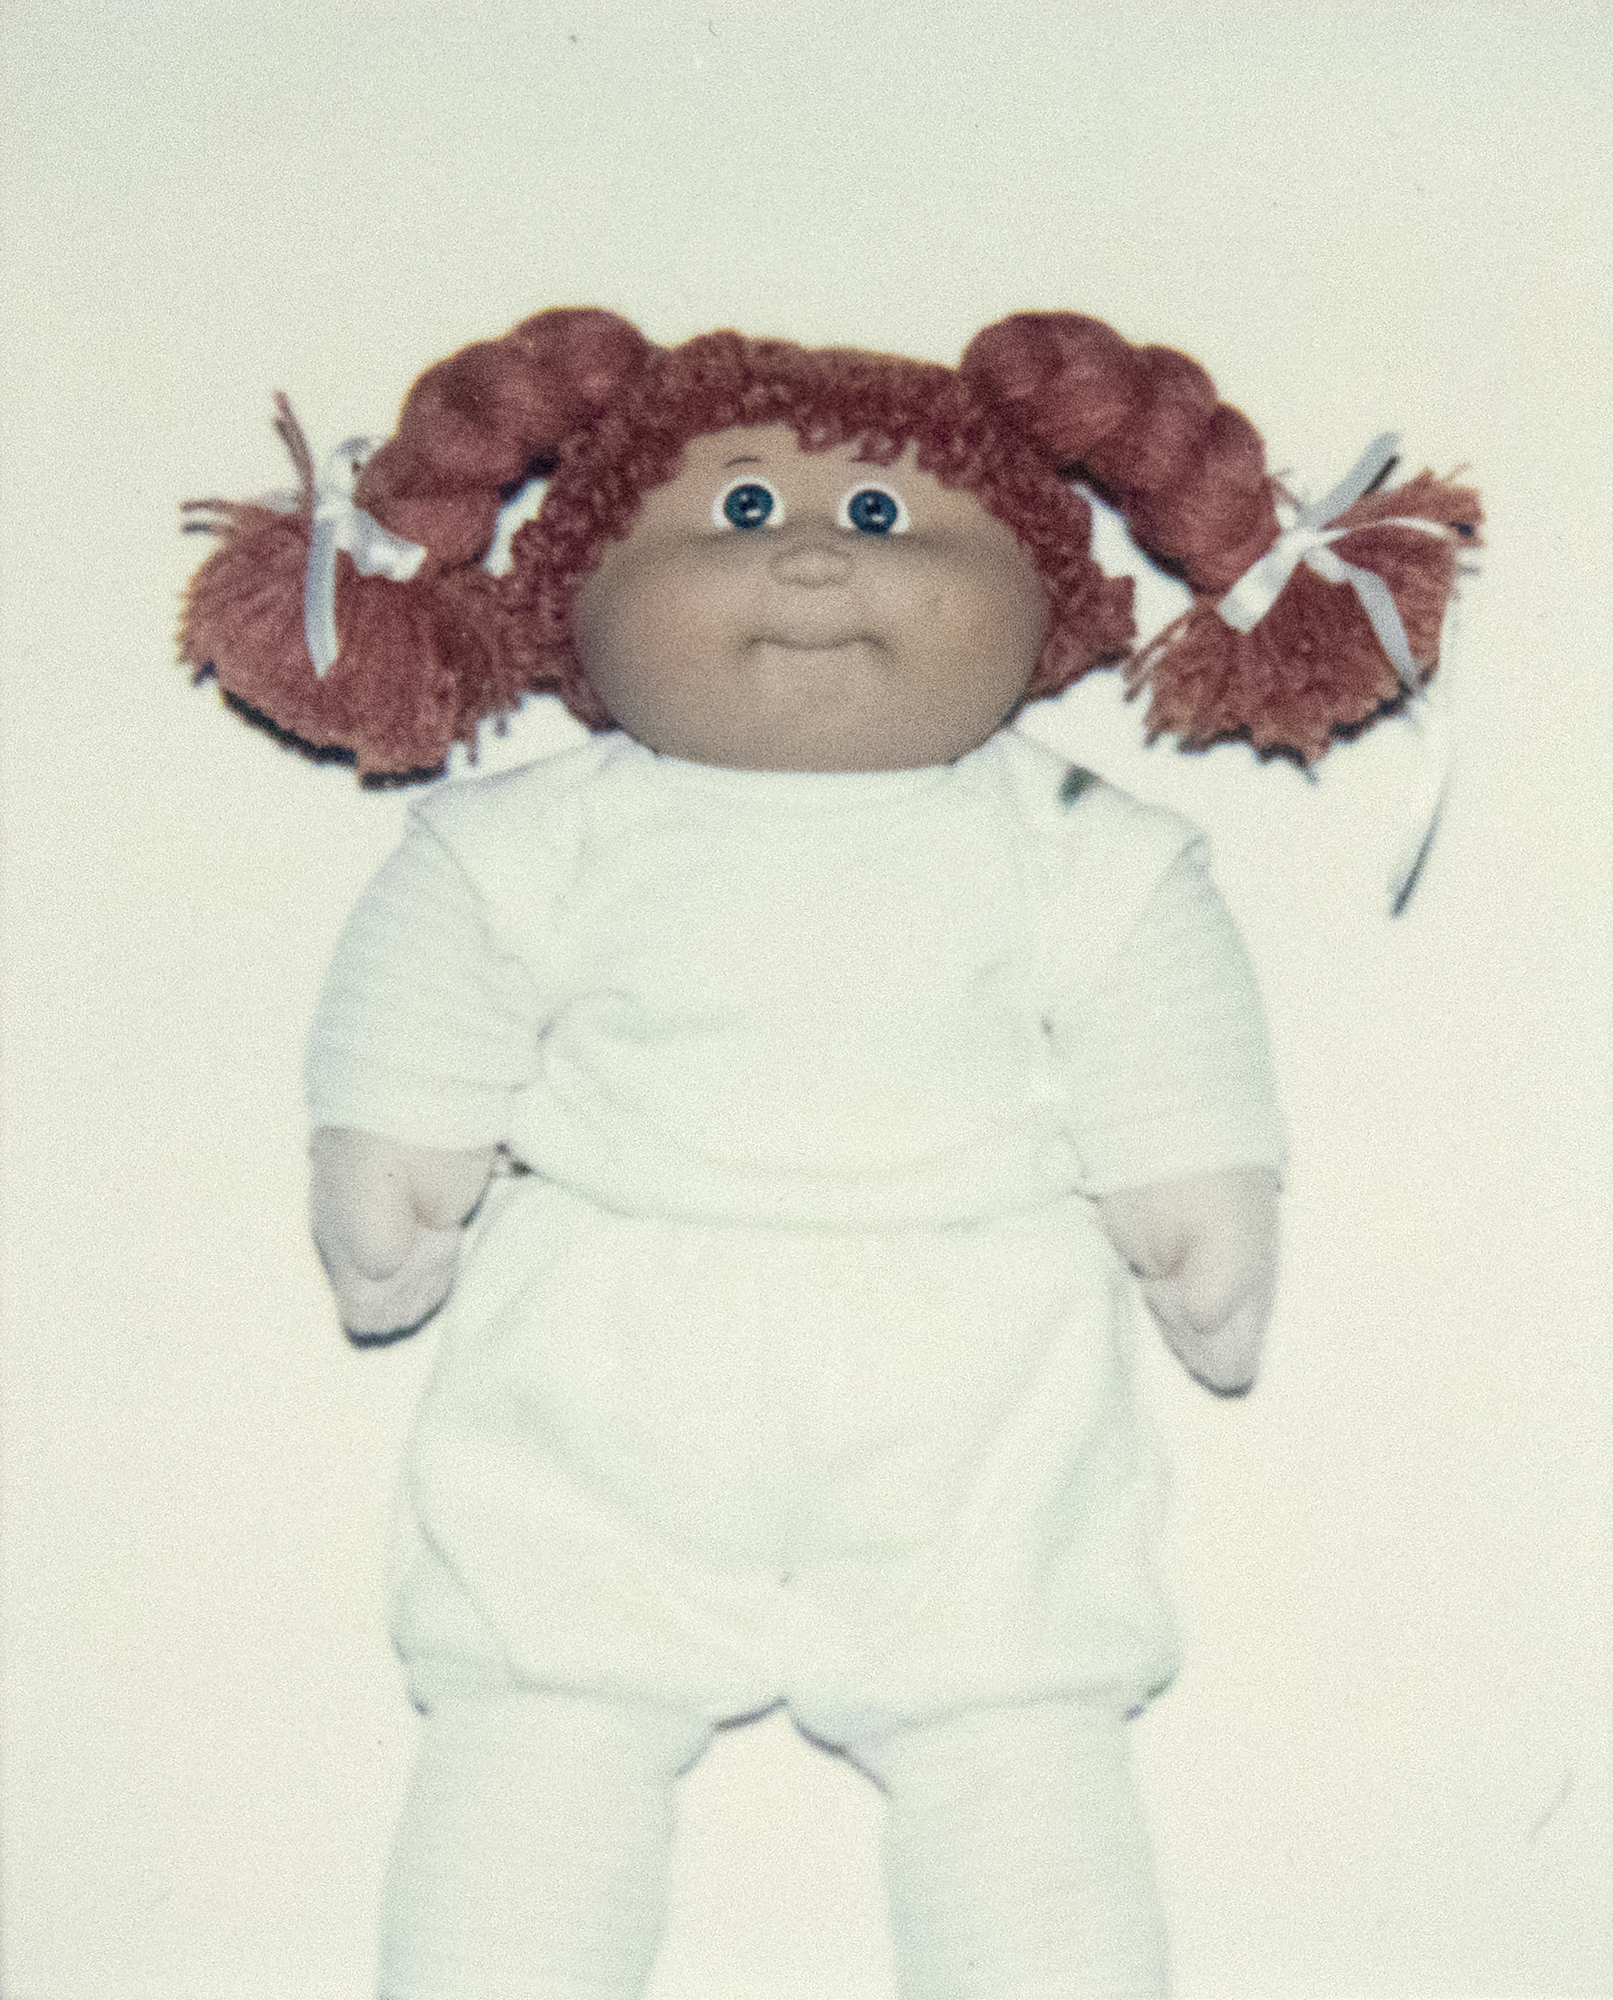 ANDY WARHOL - Cabbage Patch Doll - Polaroid, Polacolor - 4 1/4 x 3 3/8 in.